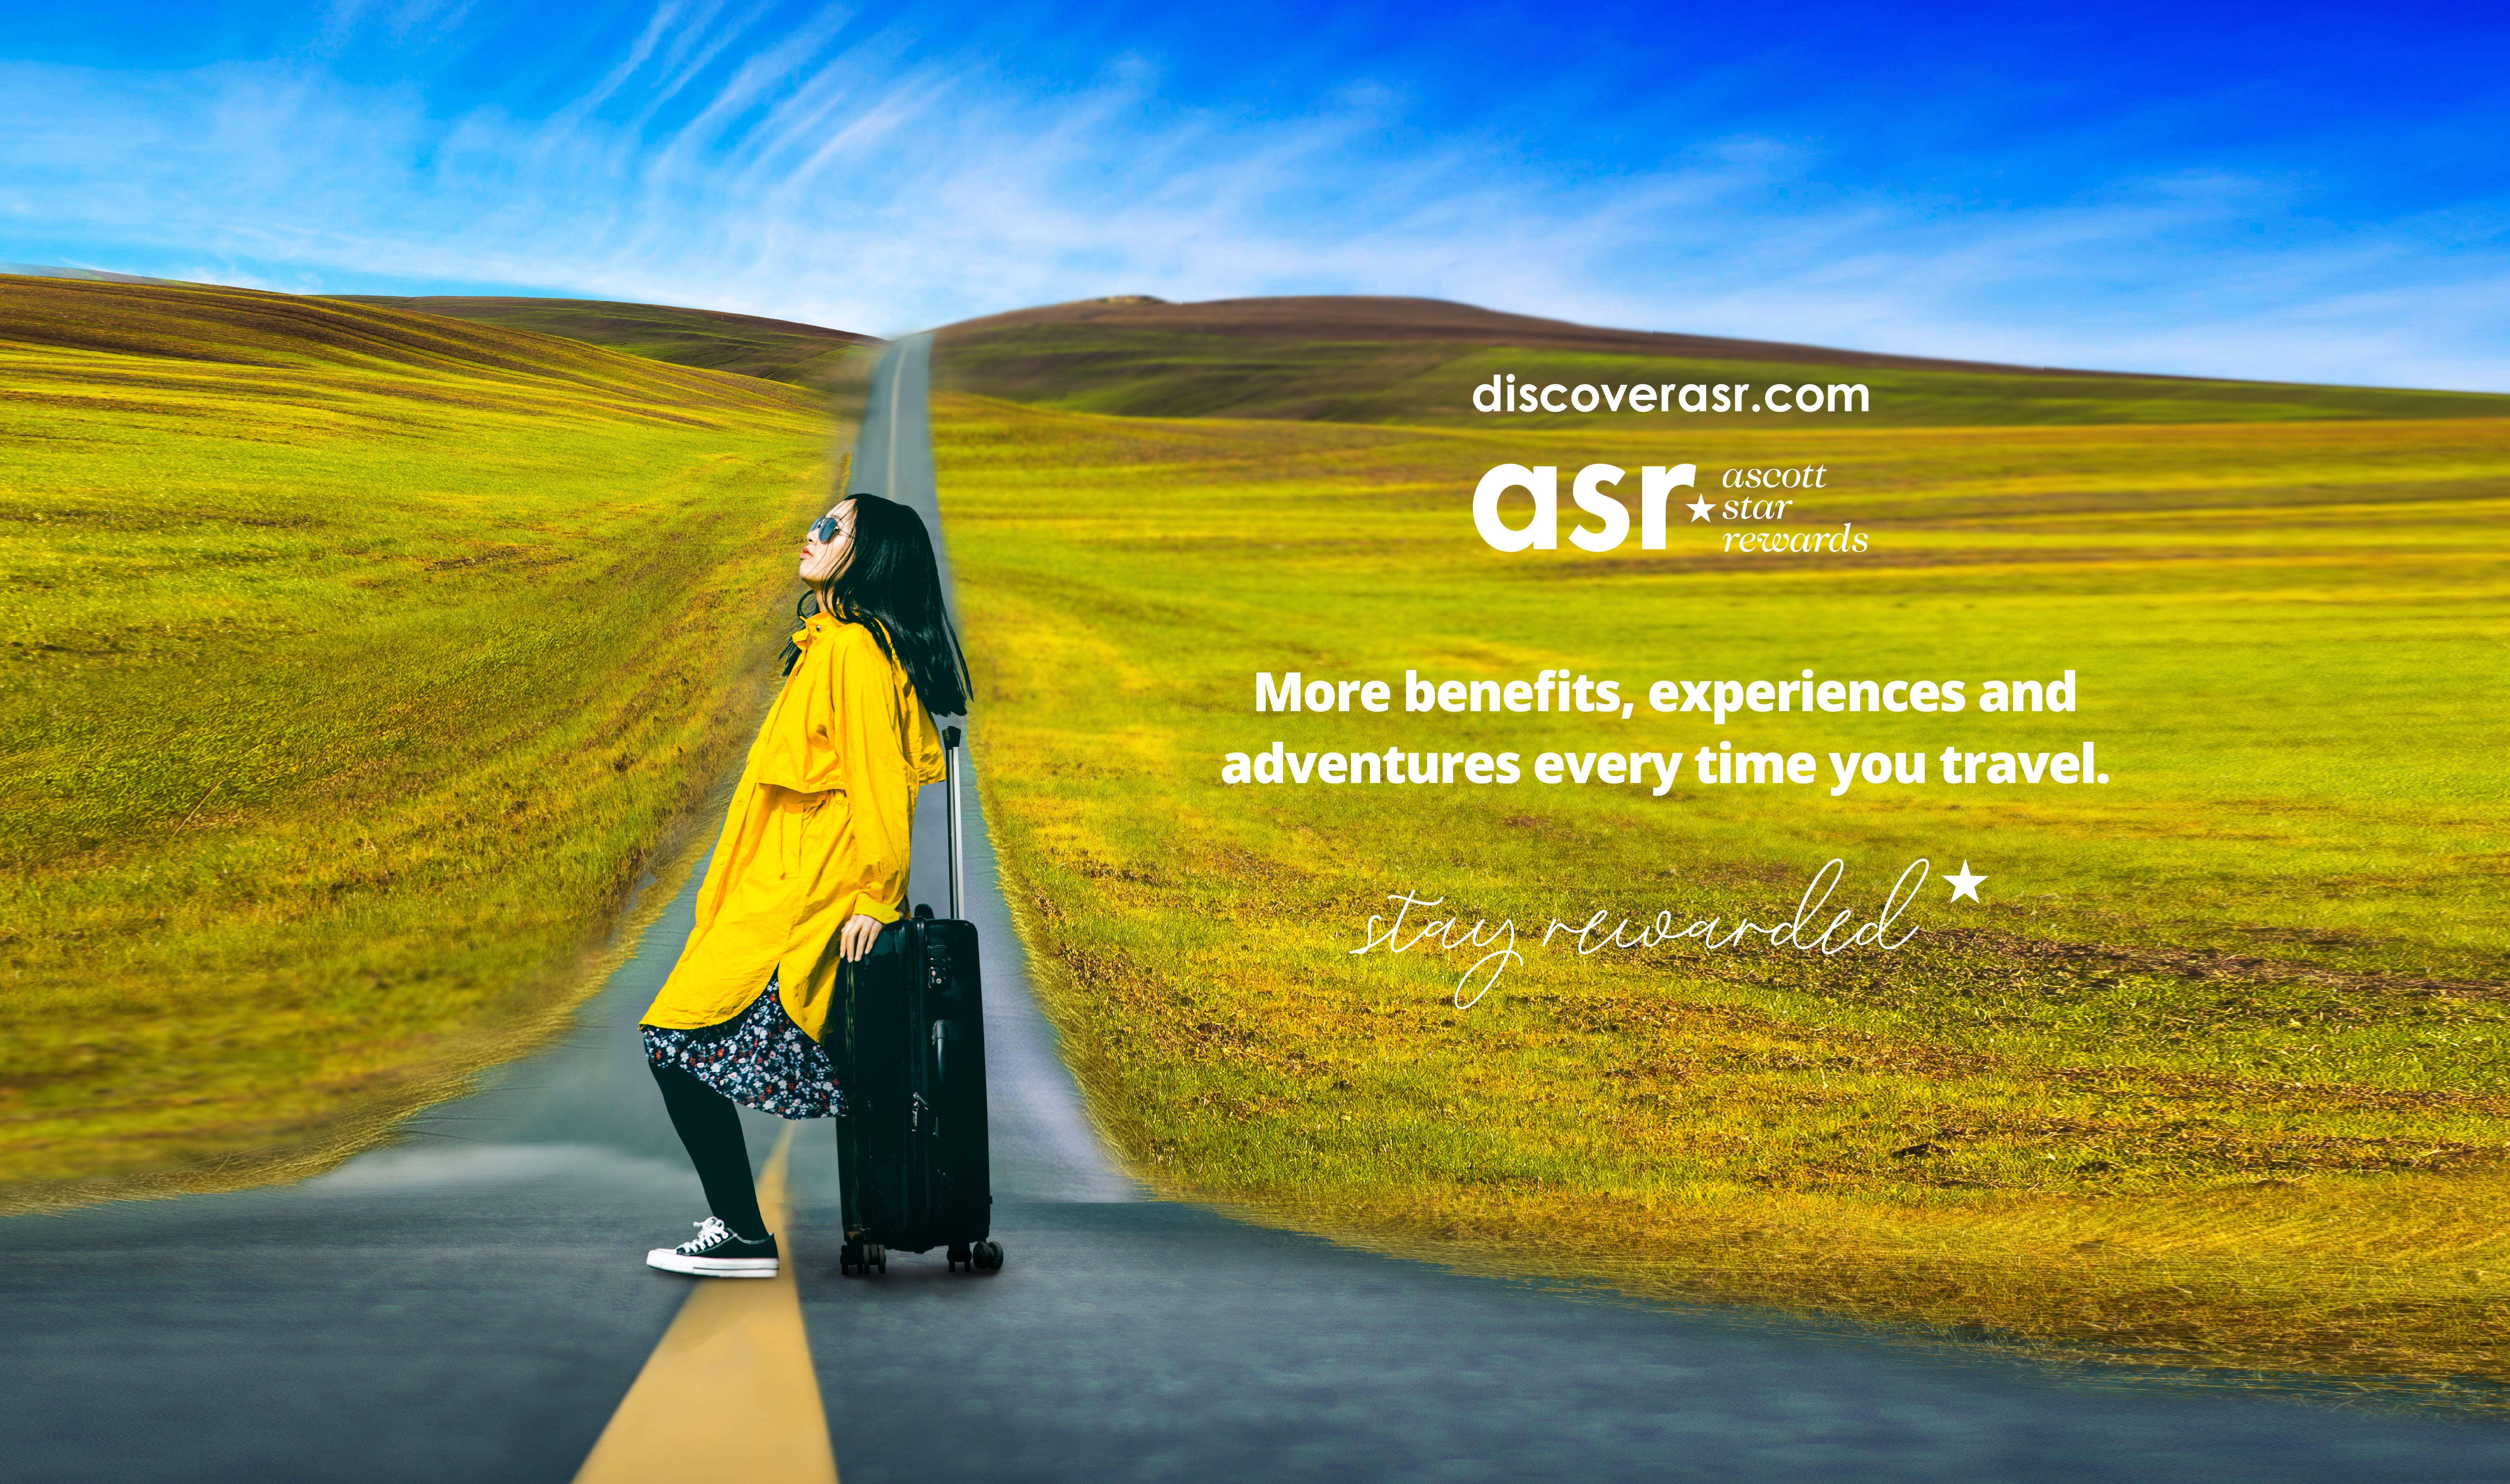 ‘Stay Rewarded’ with more benefits, experiences and adventures every time you travel